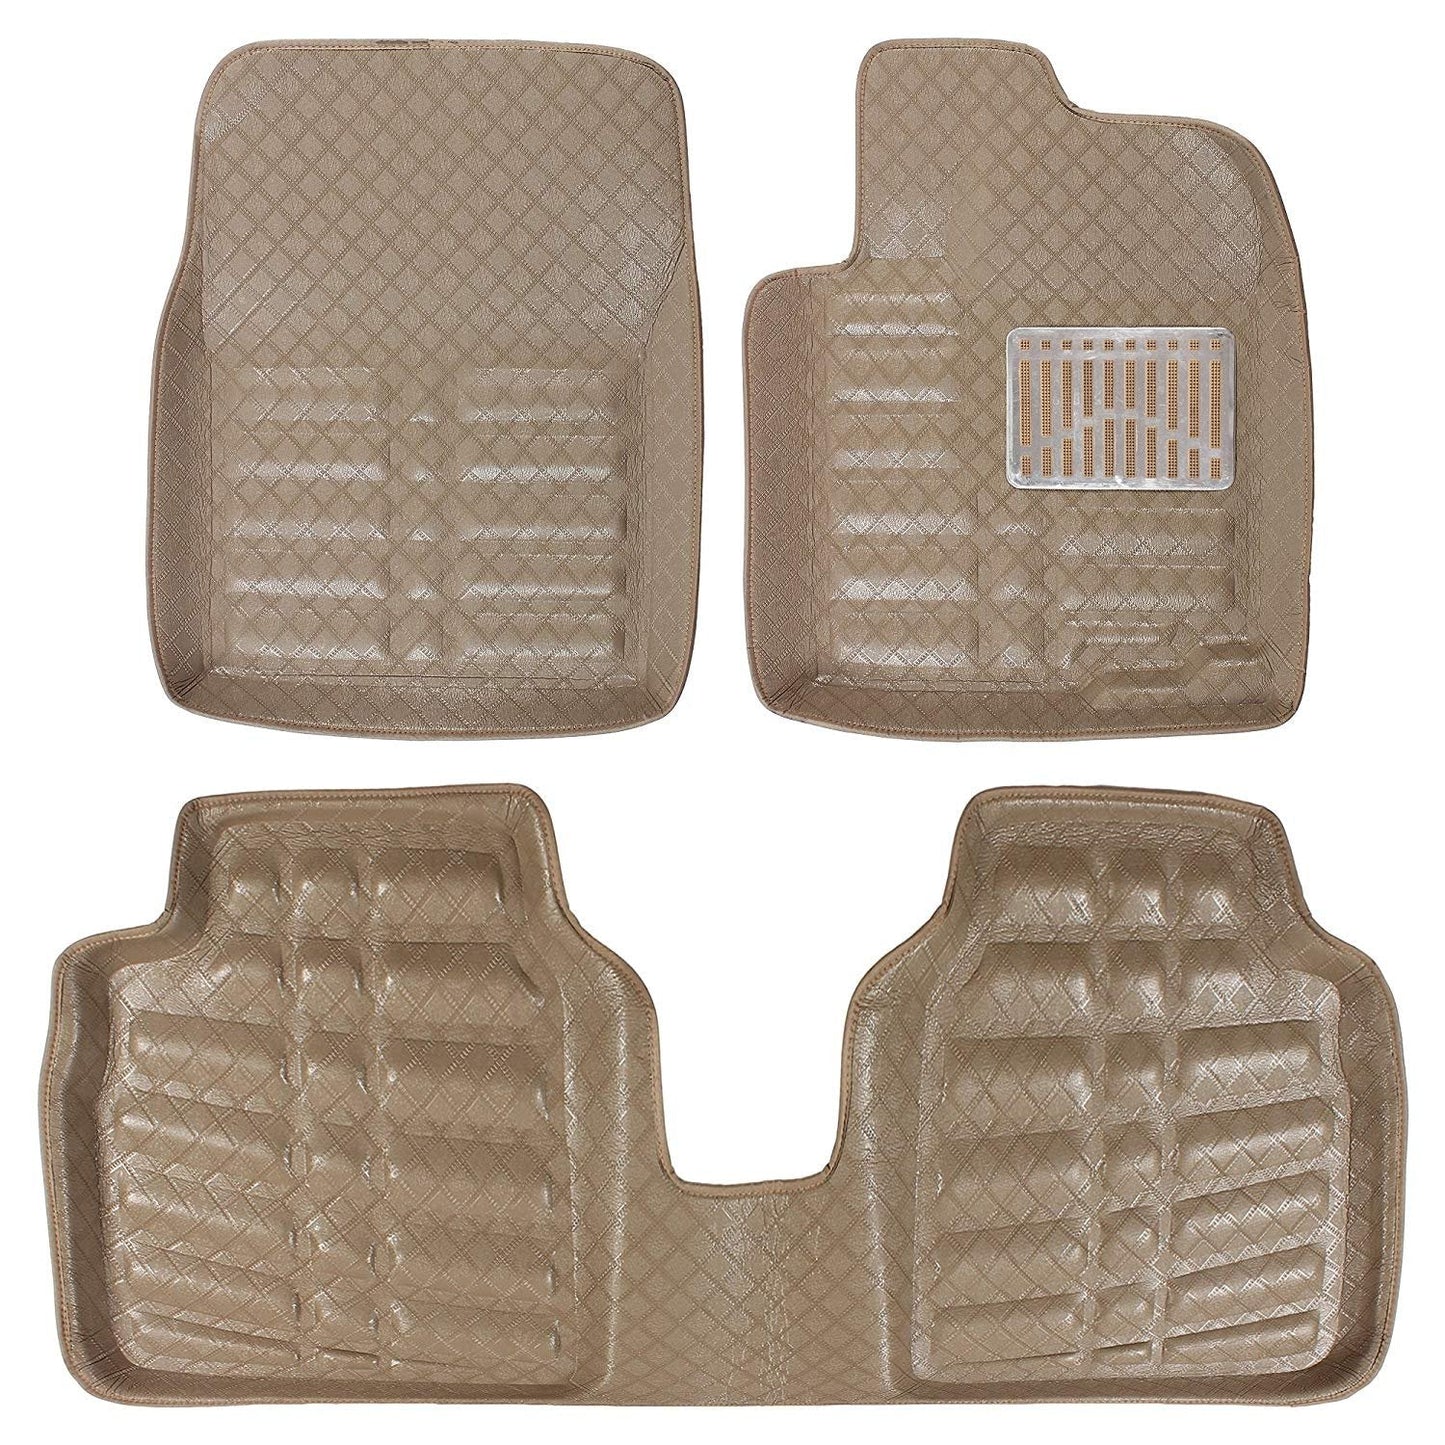 Oshotto 4D Artificial Leather Car Floor Mats For Maruti Suzuki Swift Dzire 2008-2016 - Set of 3 (2 pcs Front & one Long Single Rear pc) - Beige